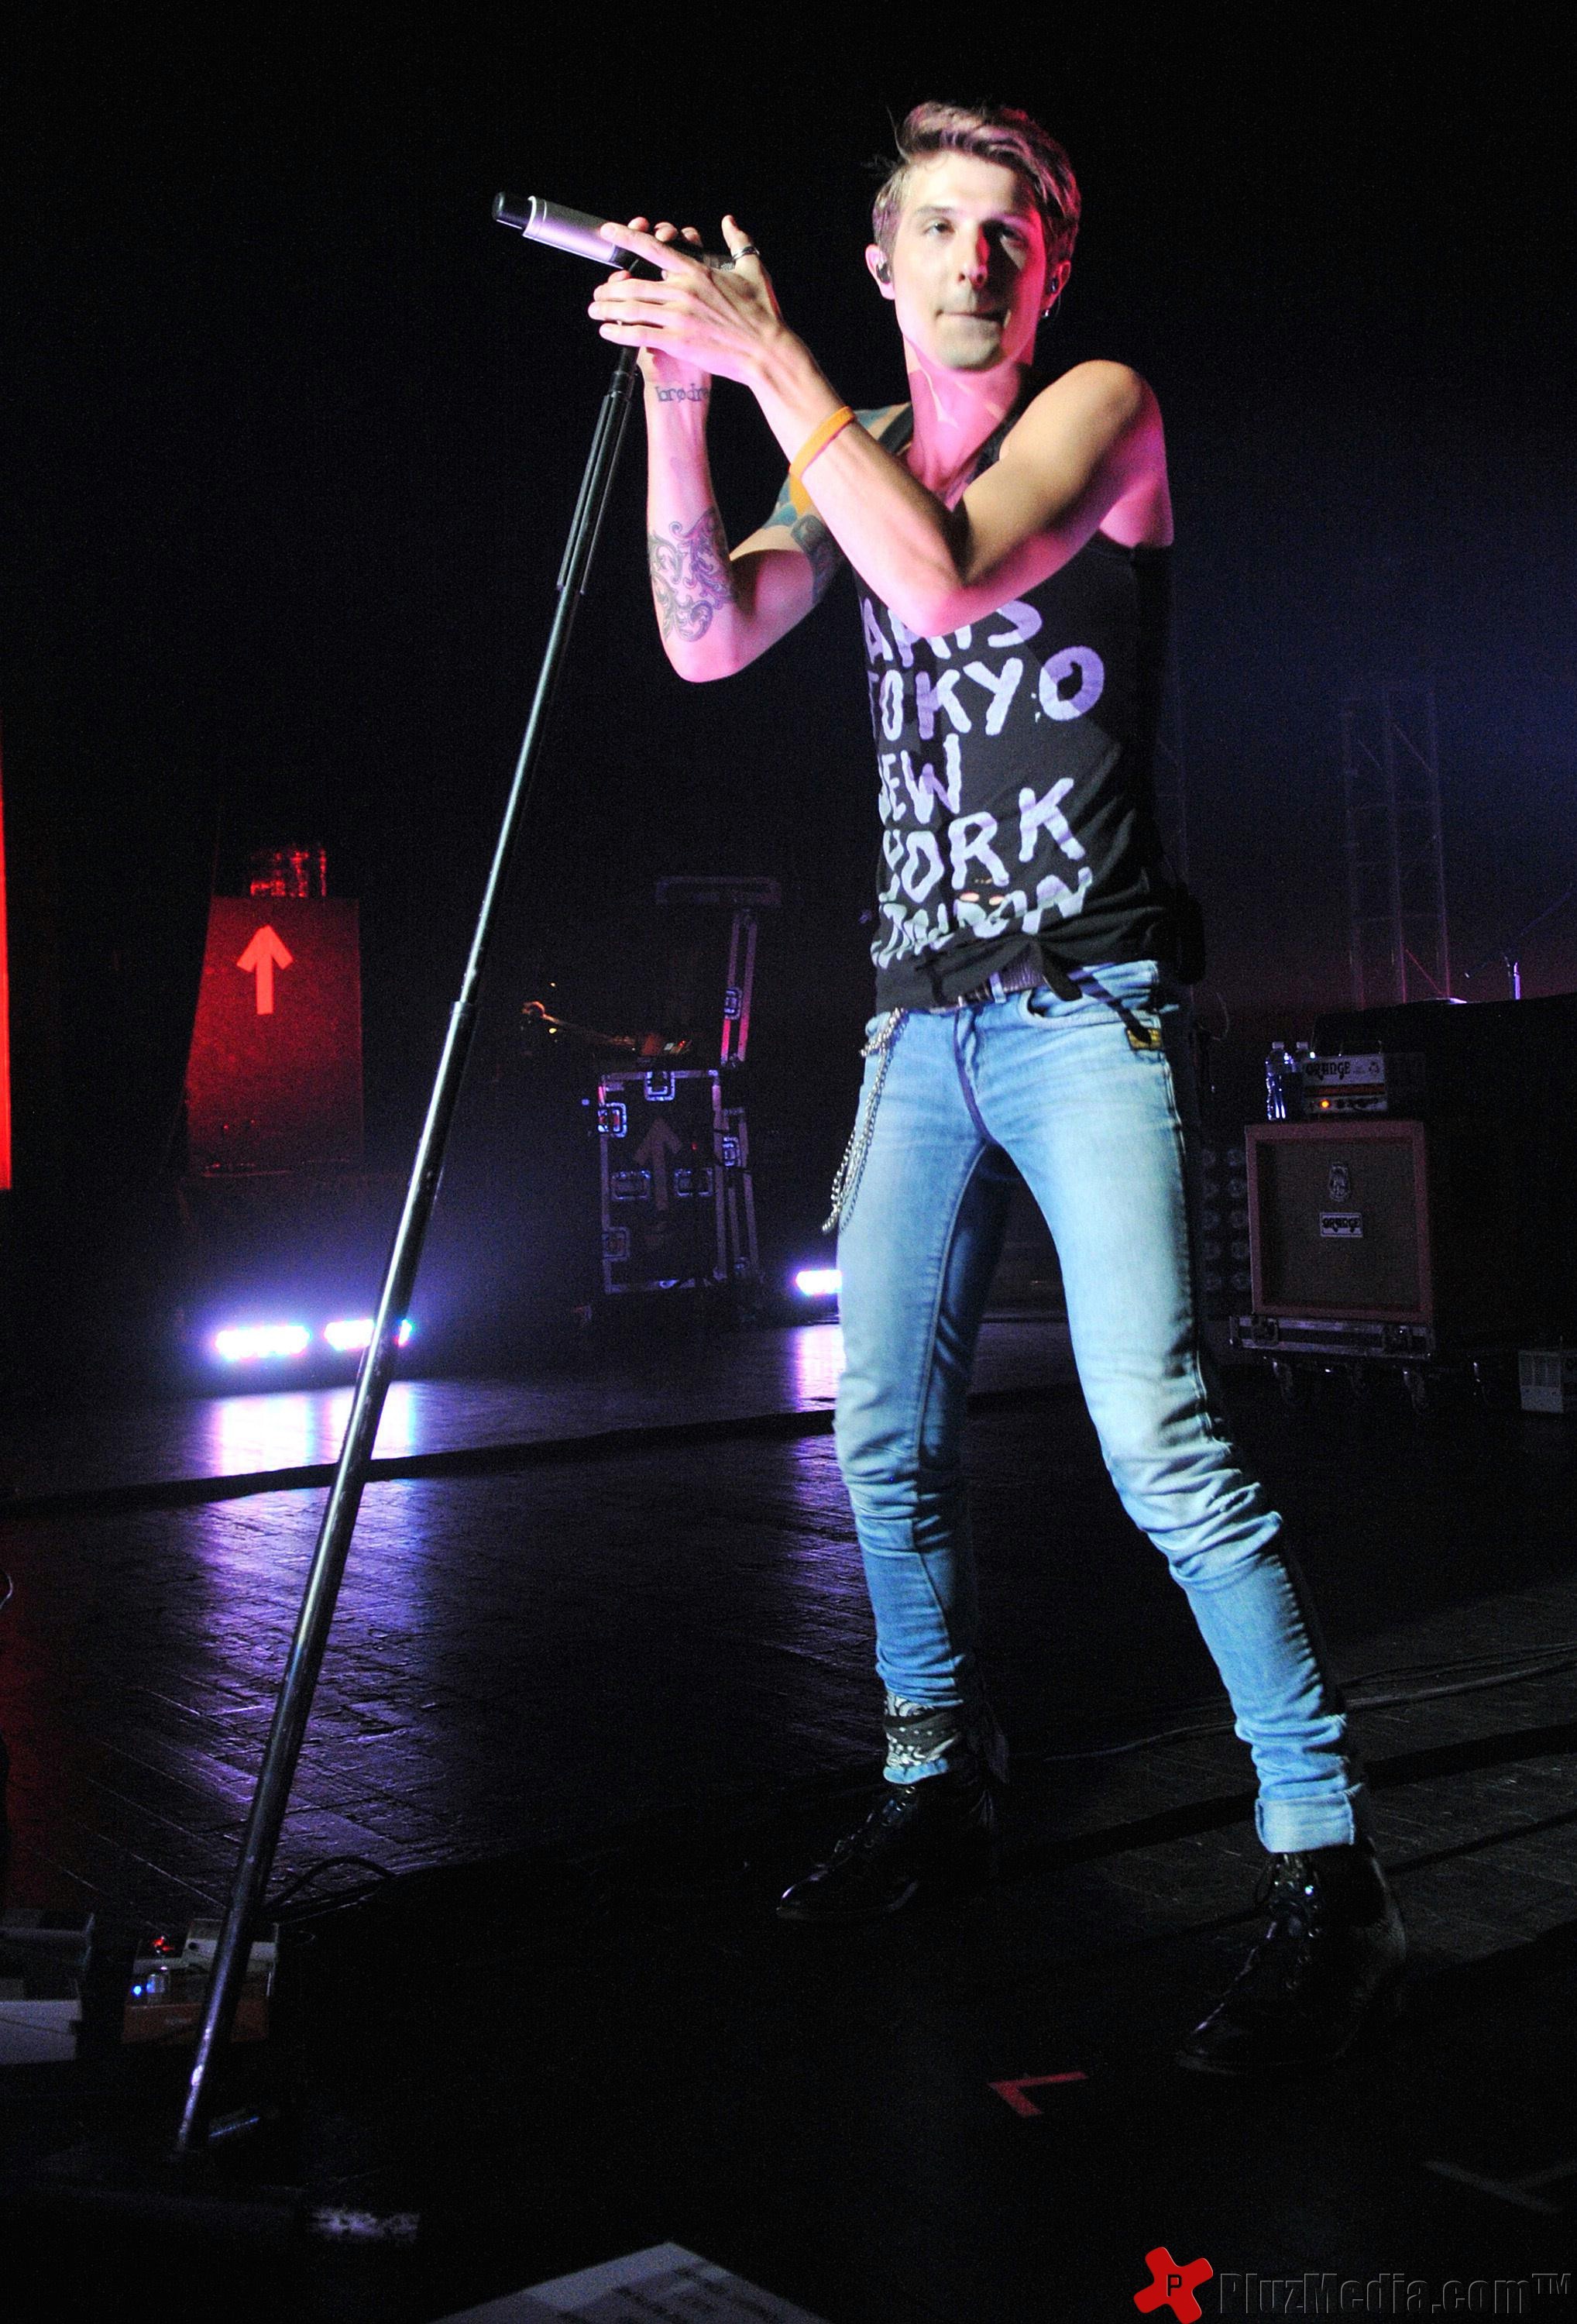 Hot Chelle Rae performing at the Fillmore Miami Beach - Photos | Picture 98286